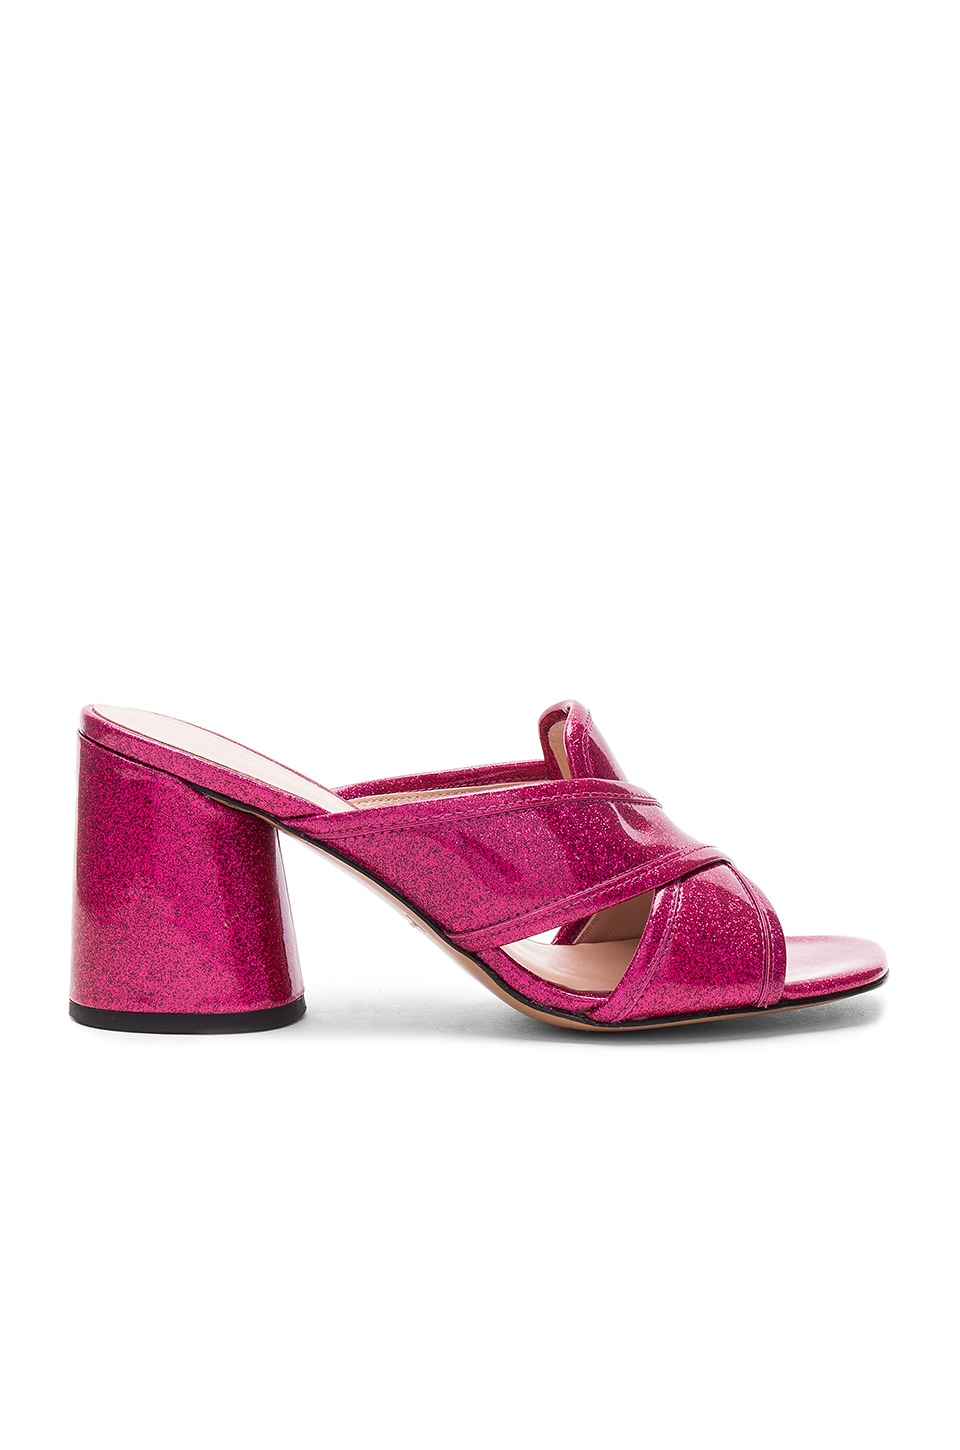 Marc Jacobs Aurora Mule in Pink | REVOLVE